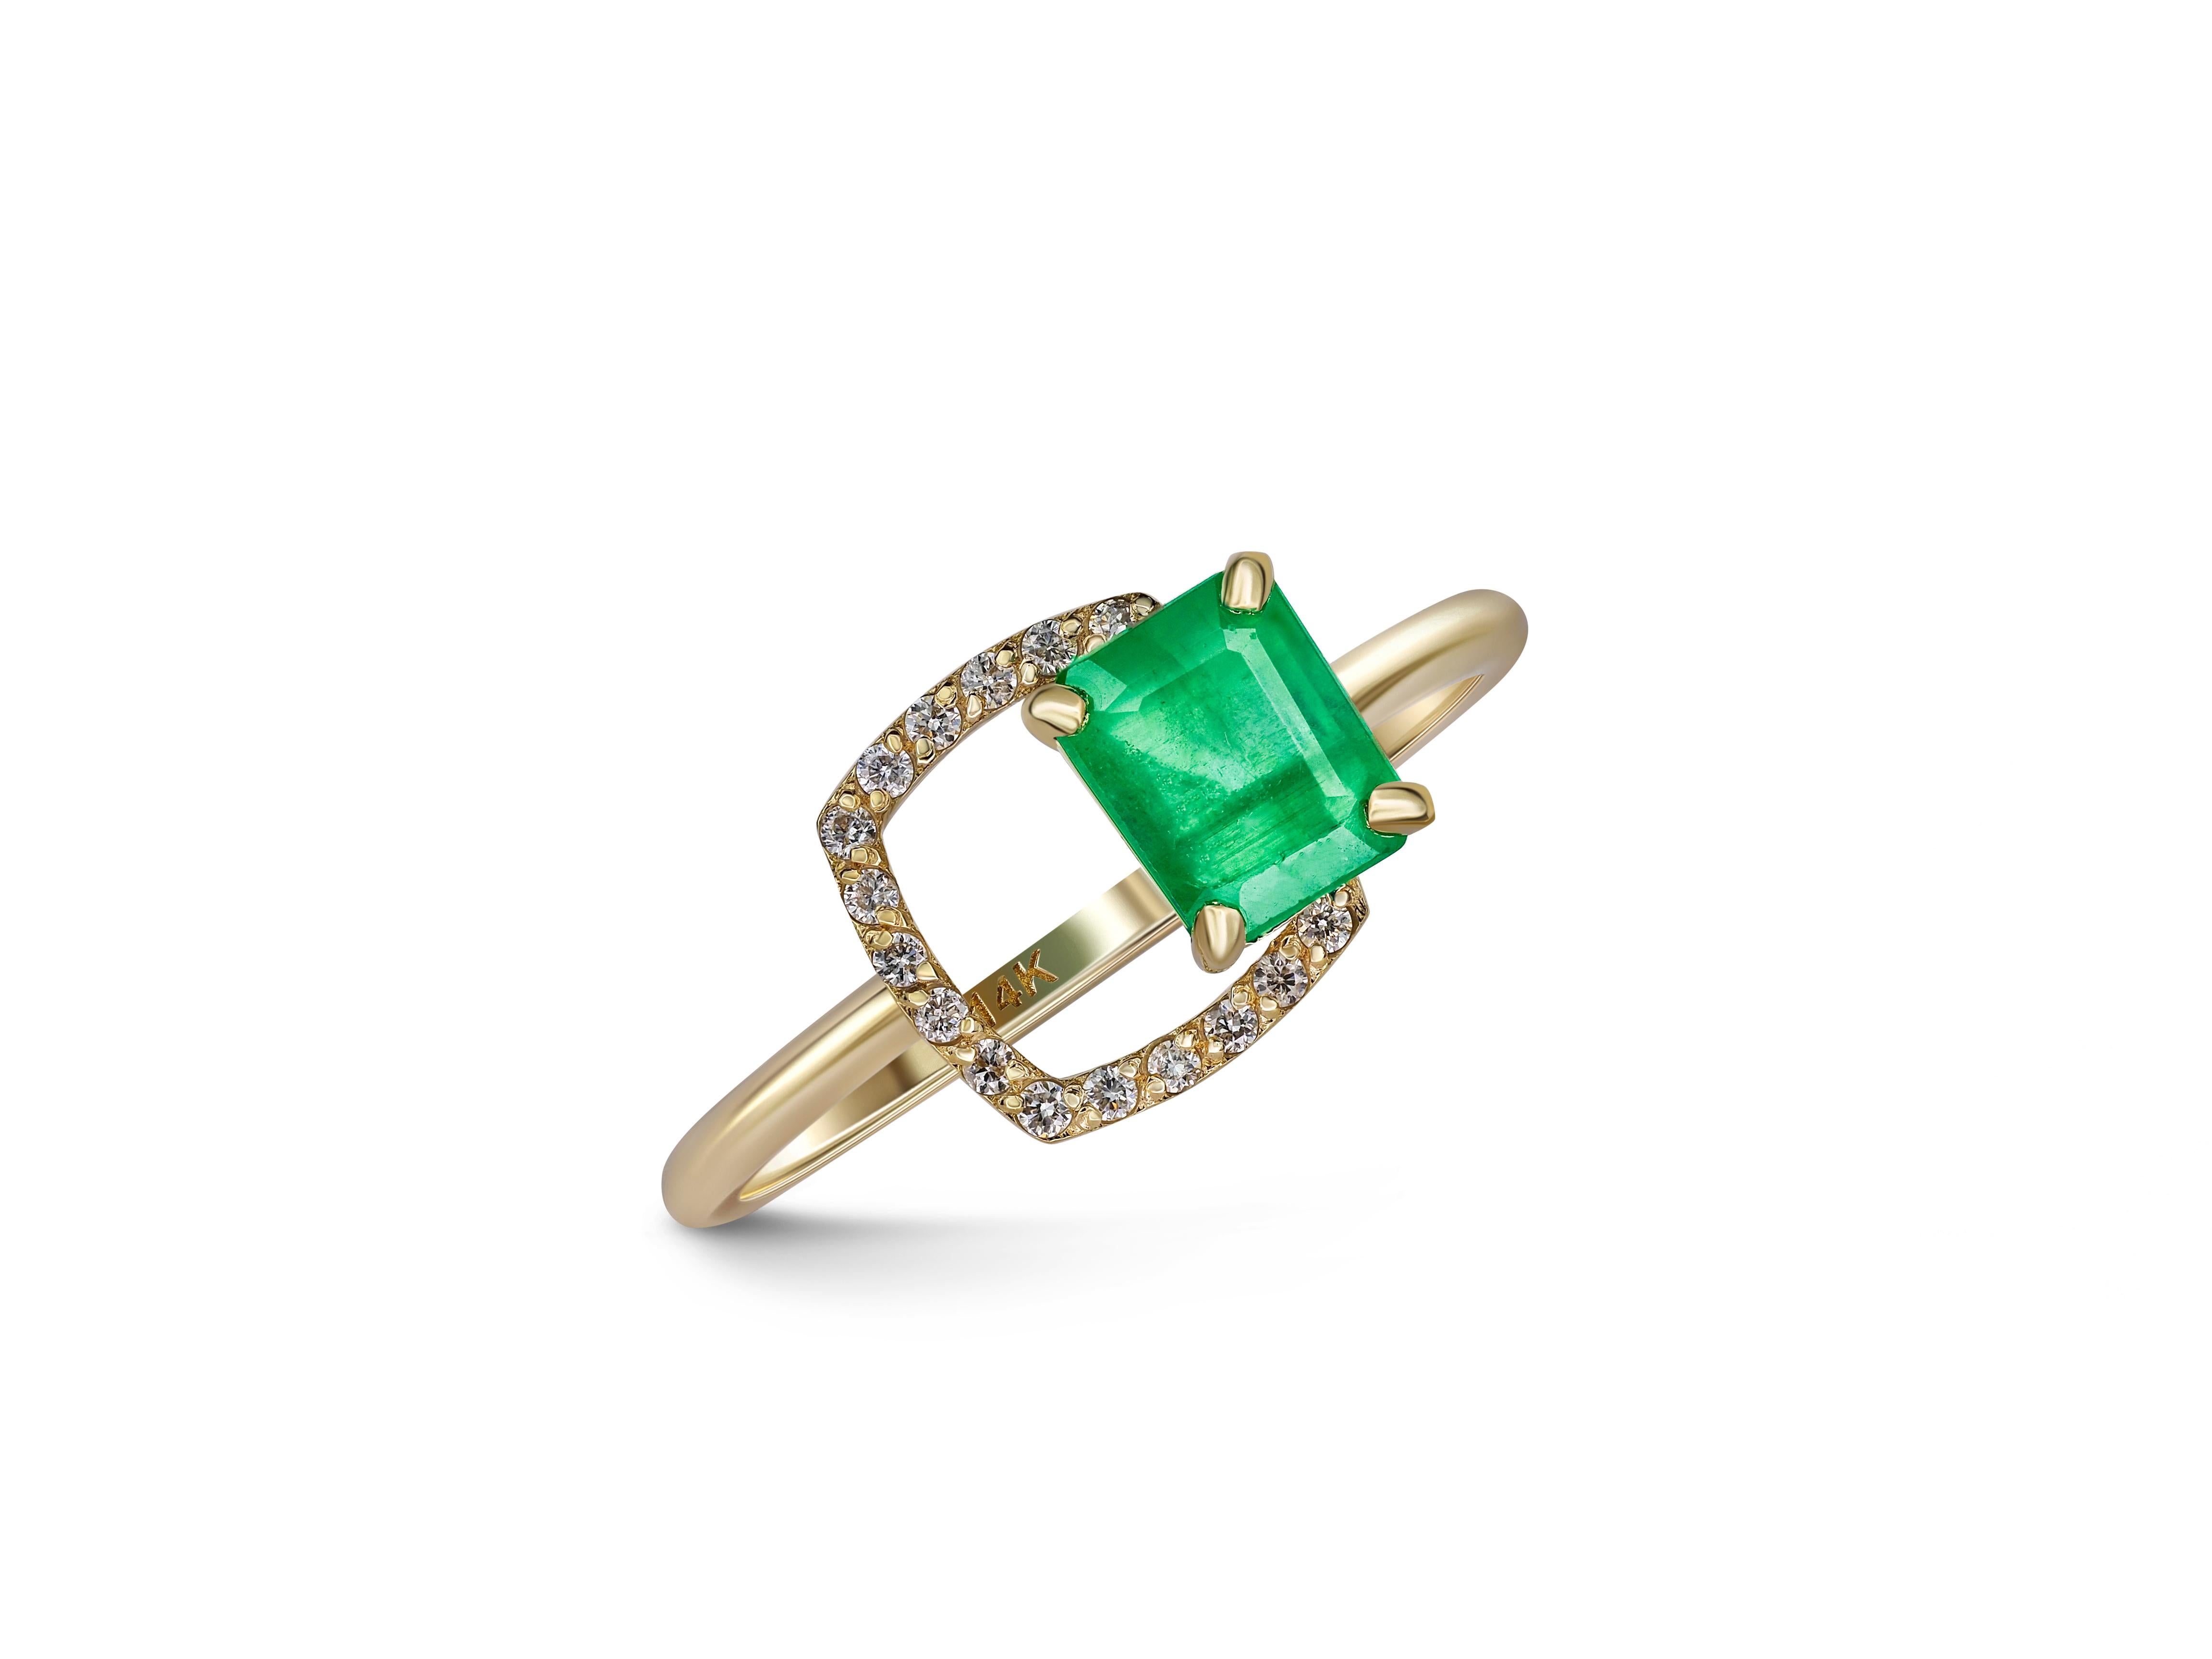 Octagon Emerald 14k gold ring. 
Emerald ring for women. Dainty emerald ring. Emerald cut ring. Statement emerald ring. May birthstone ring.

Metal: 14k gold
Weight: 1.95 g. depends from size.

Set with emerald.
Color - green
Octagon cut, approx 0.7-